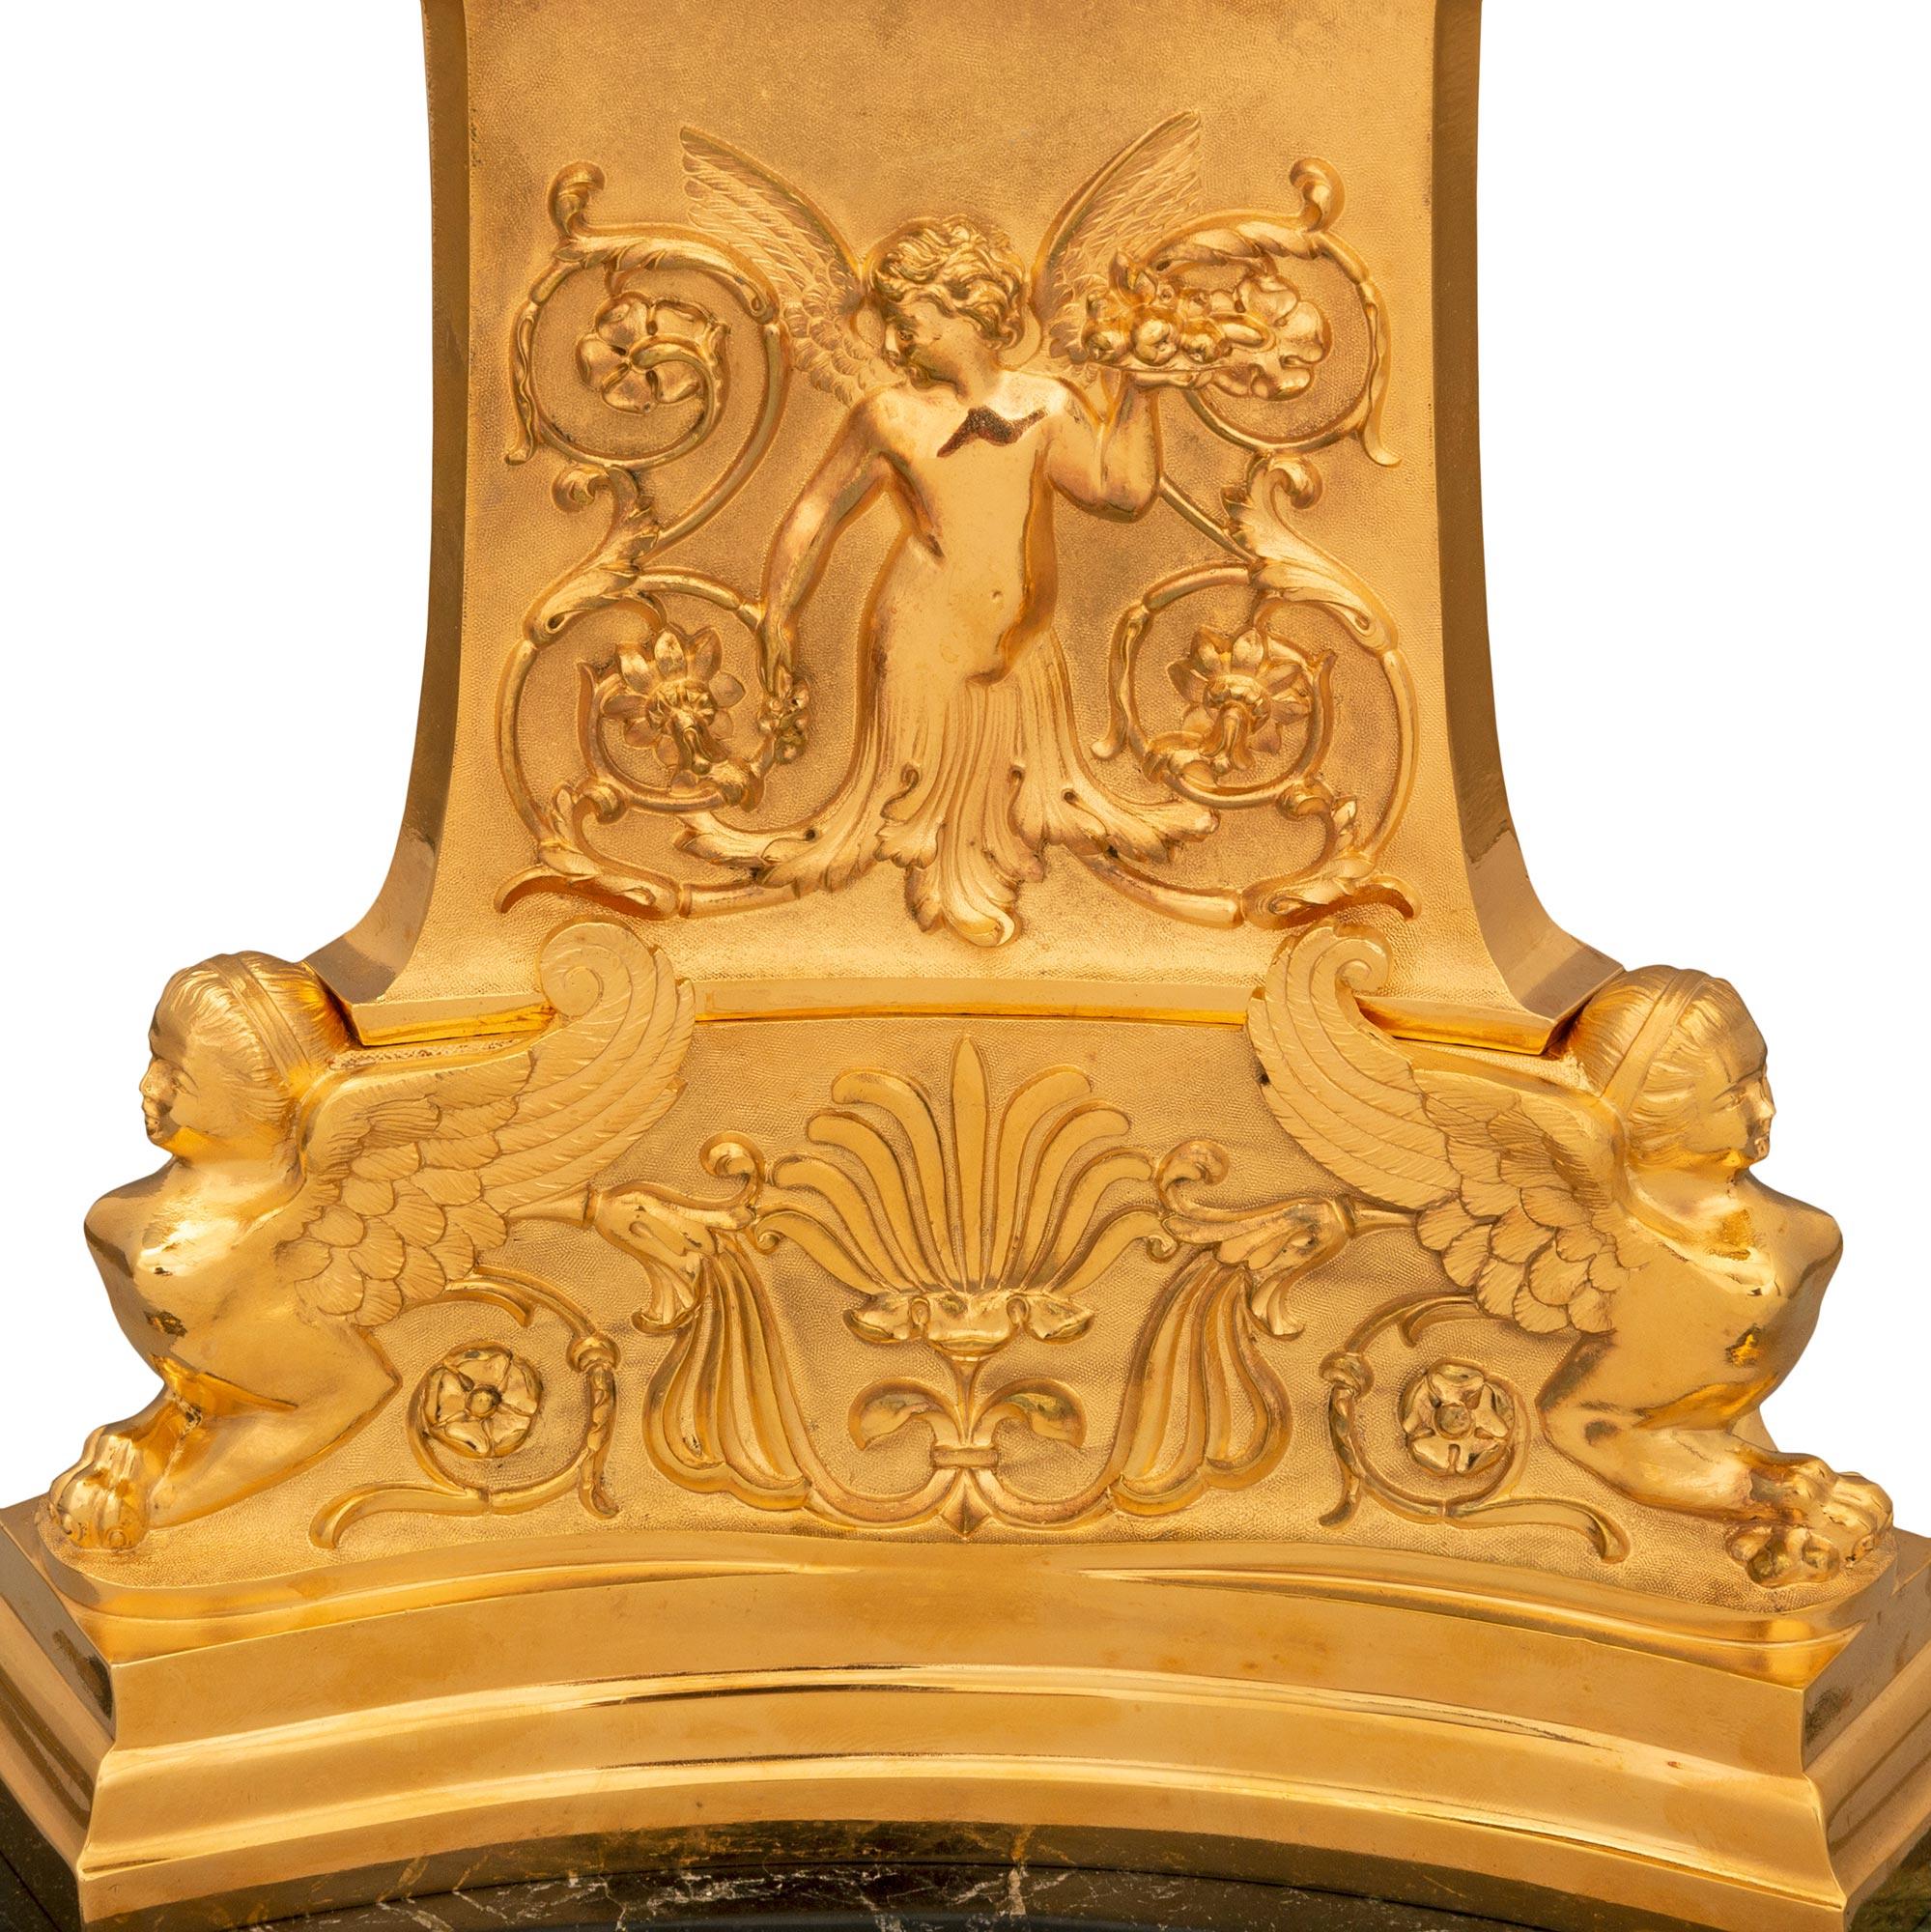 French 19th Century Empire St. Belle Époque Period Marble and Ormolu Lamp For Sale 4